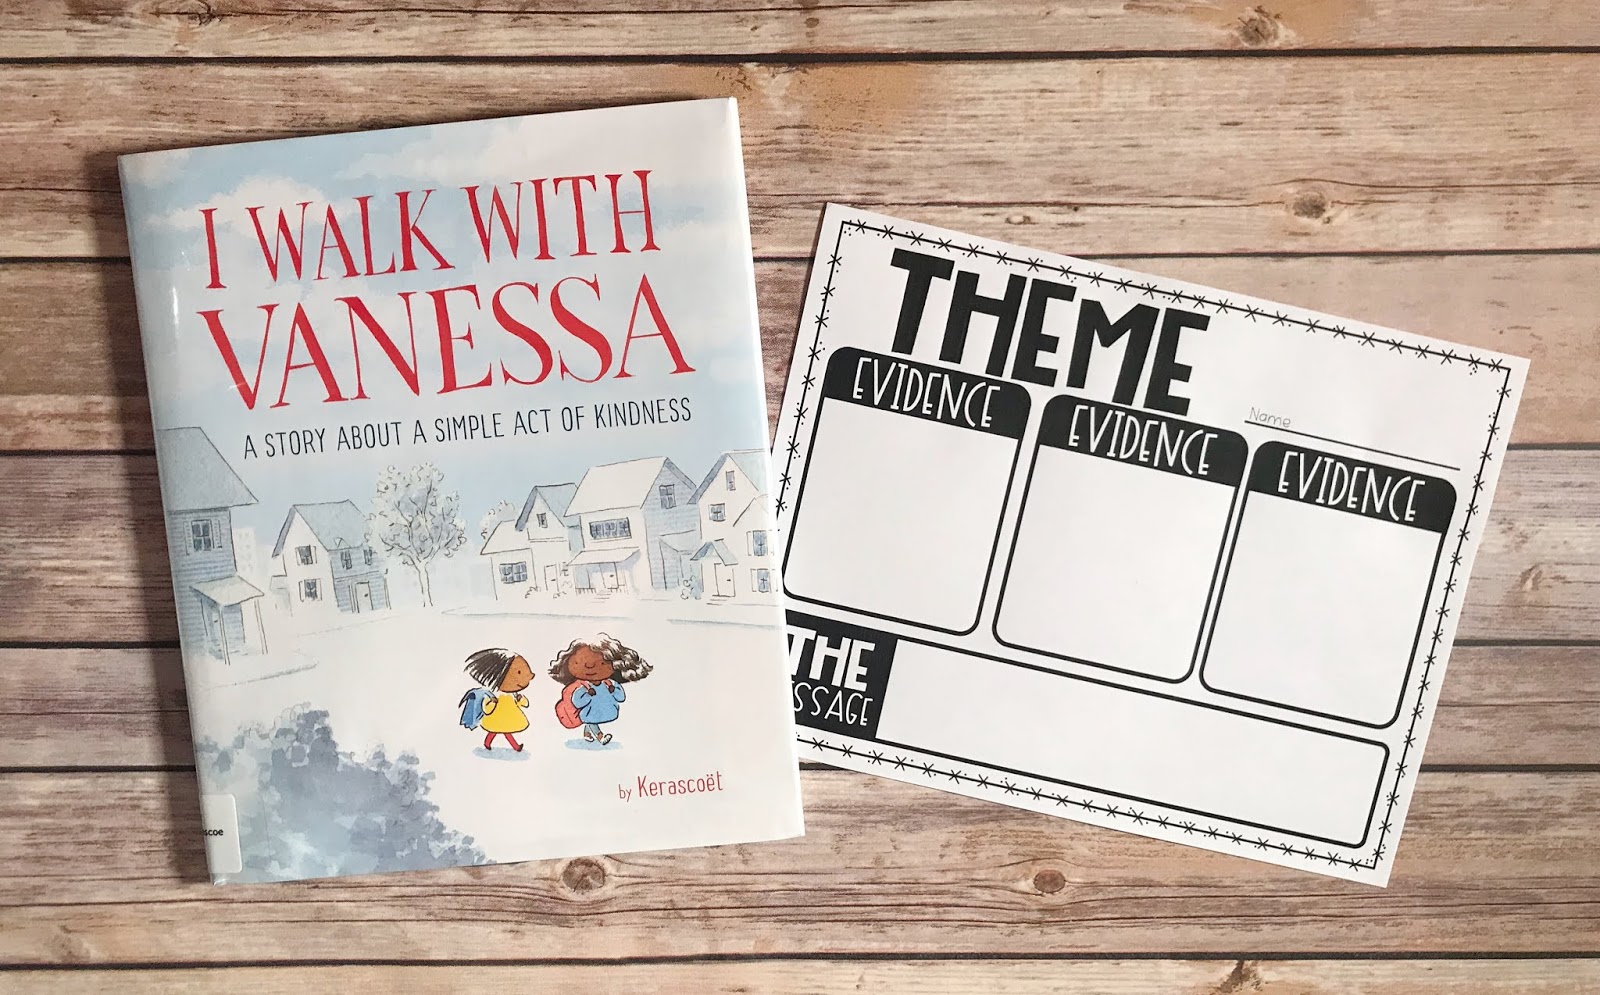  Using Mentor texts is fun way to teach or review theme to upper elementary students. These digital and printable graphic organizers are a fun way to engage , whether you utilize mentor texts in centers, small groups or the whole class. The stories cover a range of topics to captivate third, fourth, and fifth graders. Some stories and illustrations may seem simple but have a deeper theme, the students can pick up on.  {3rd, 4th, 5th, theme, reading comprehension}